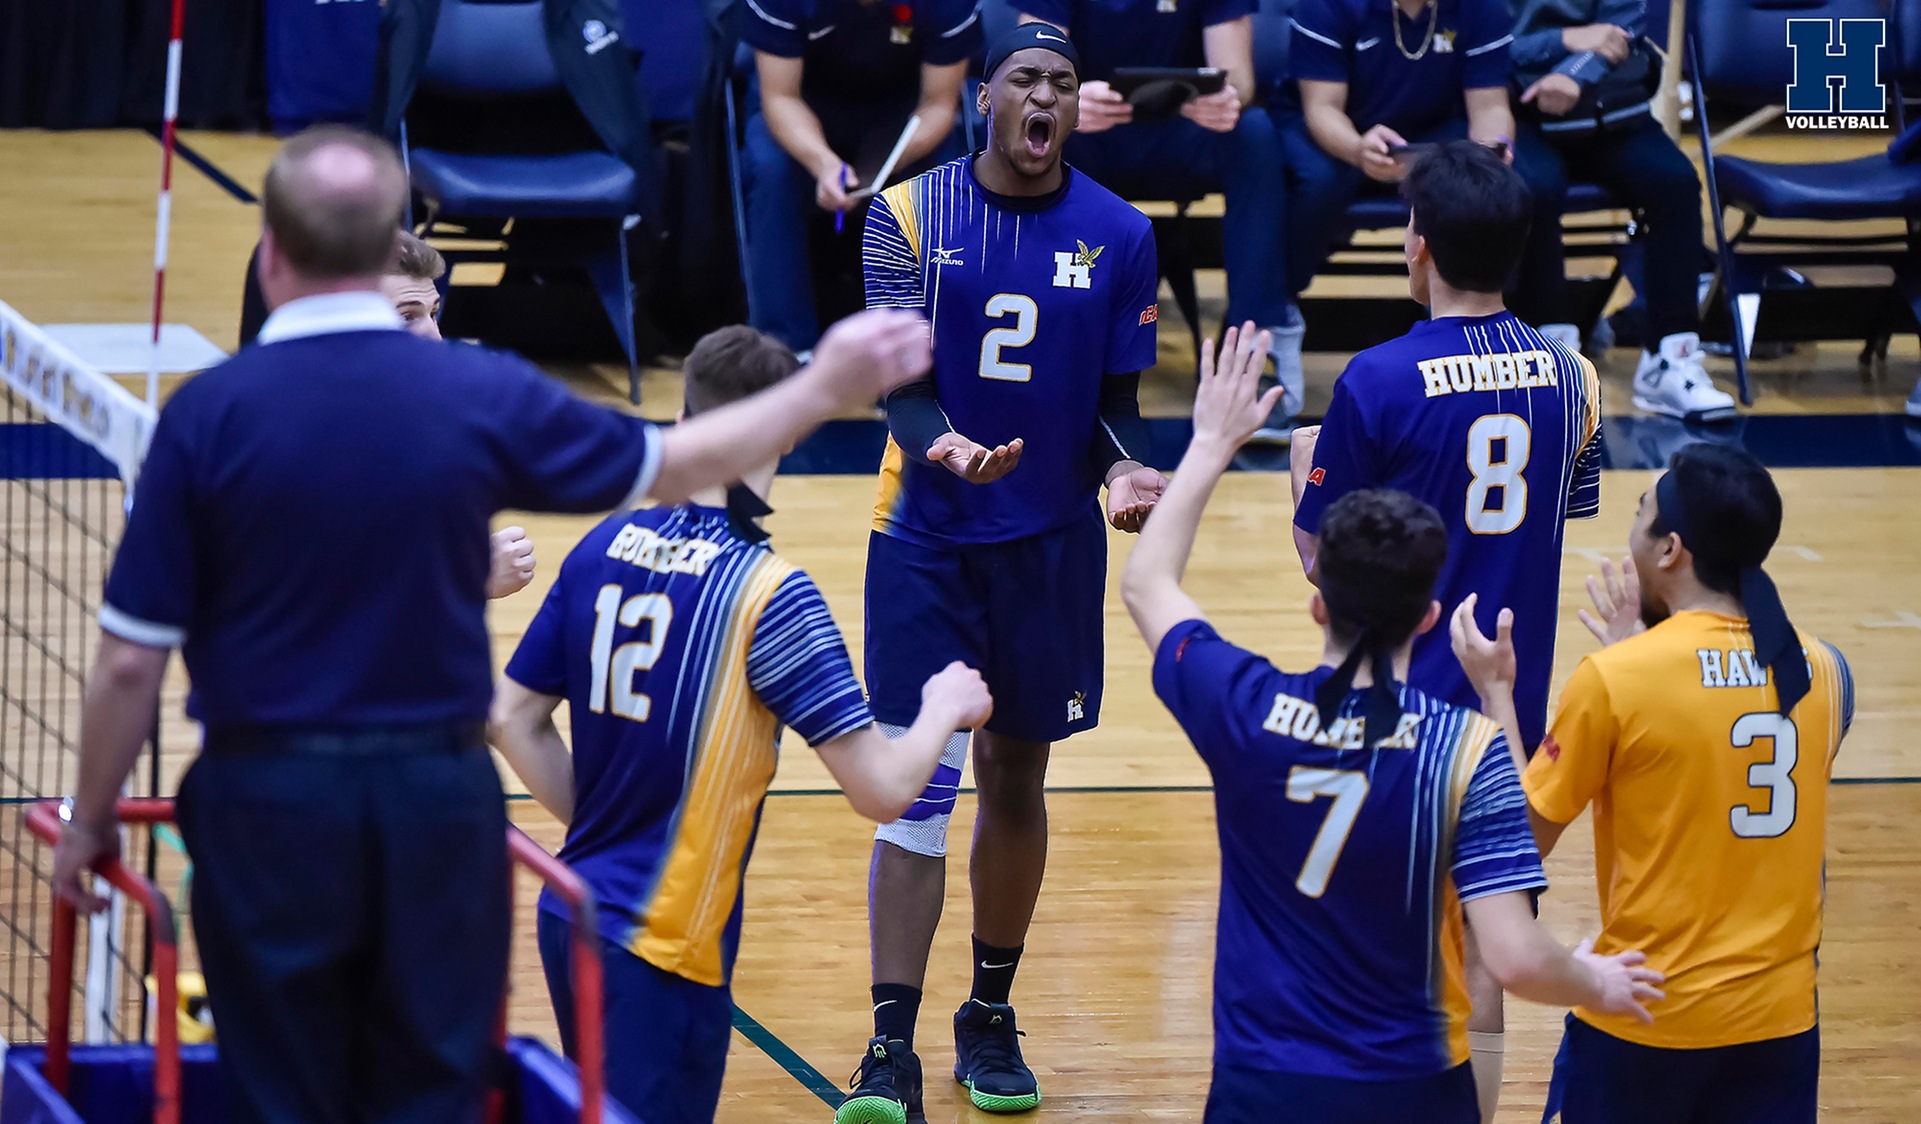 No. 2 Men's Volleyball Extends Win Streak With Sweep of Sheridan